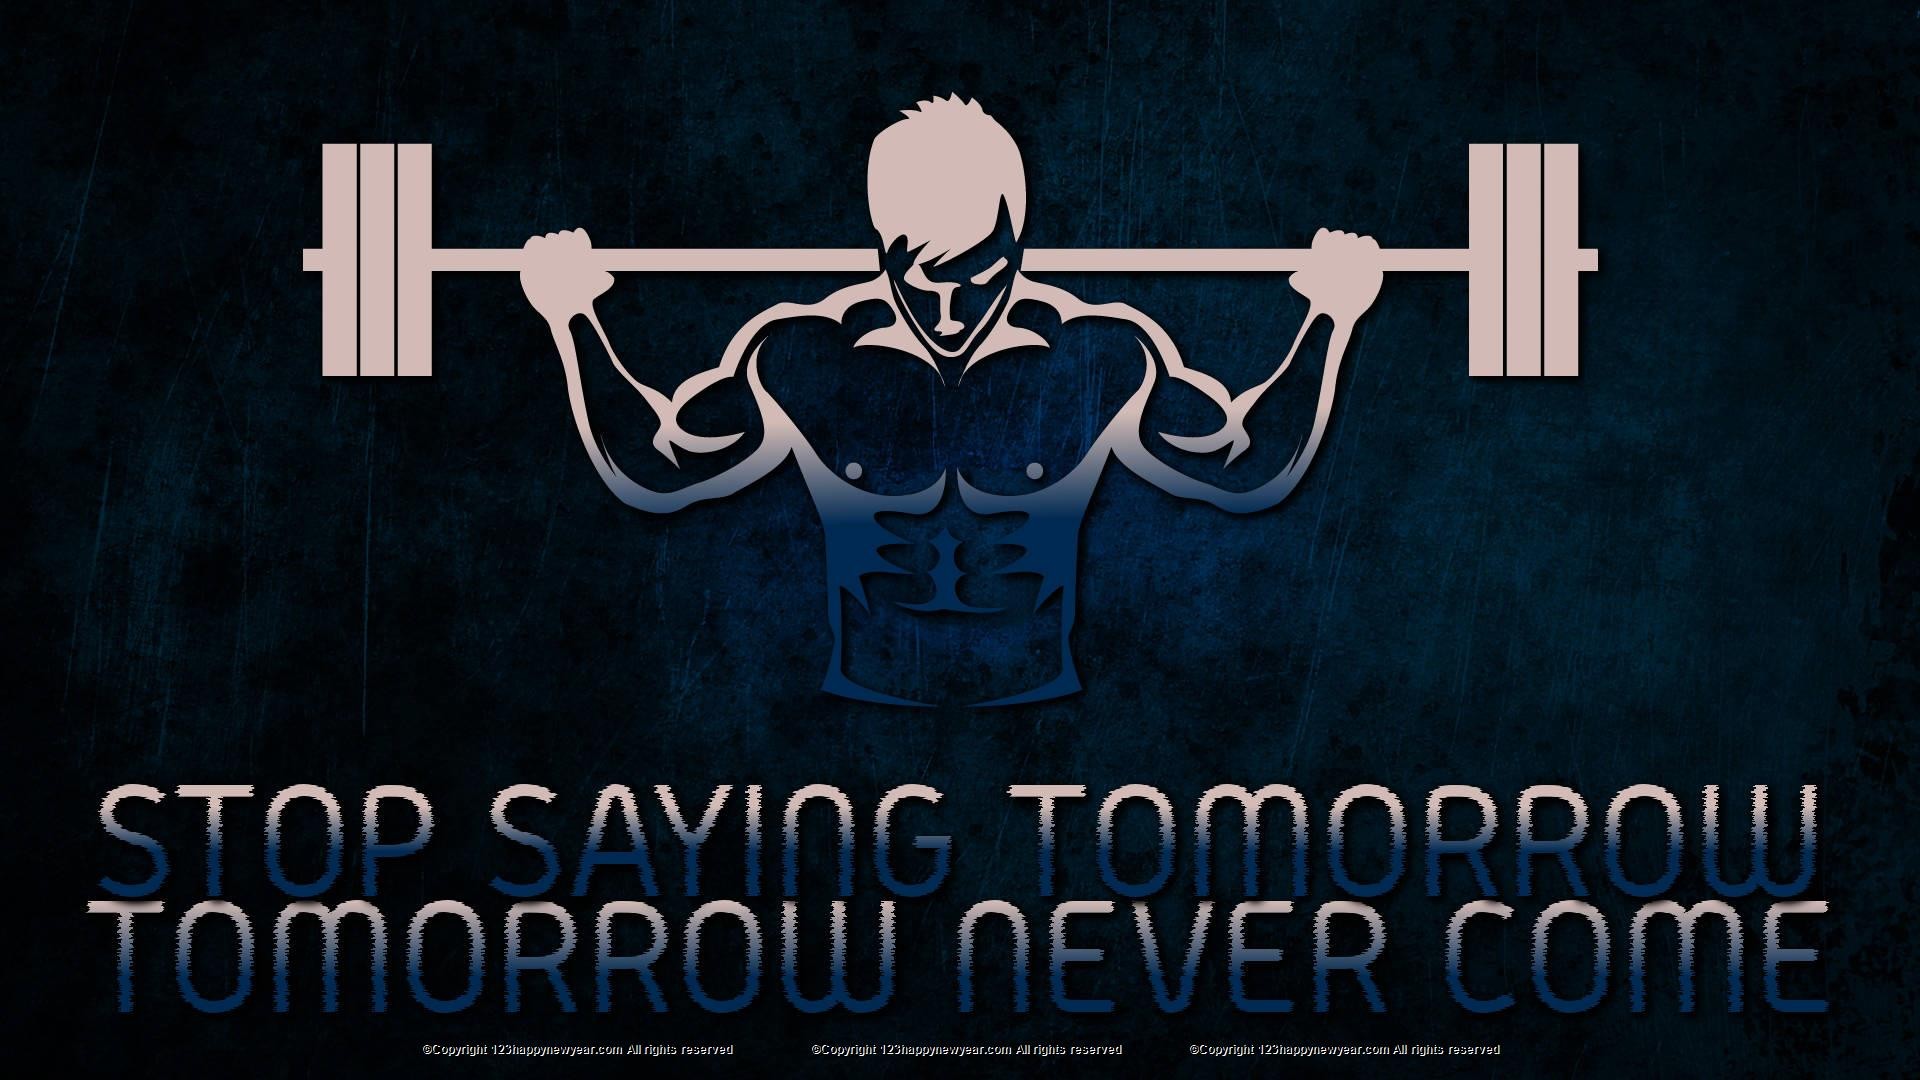 [97+] Gym Quotes Wallpapers on WallpaperSafari